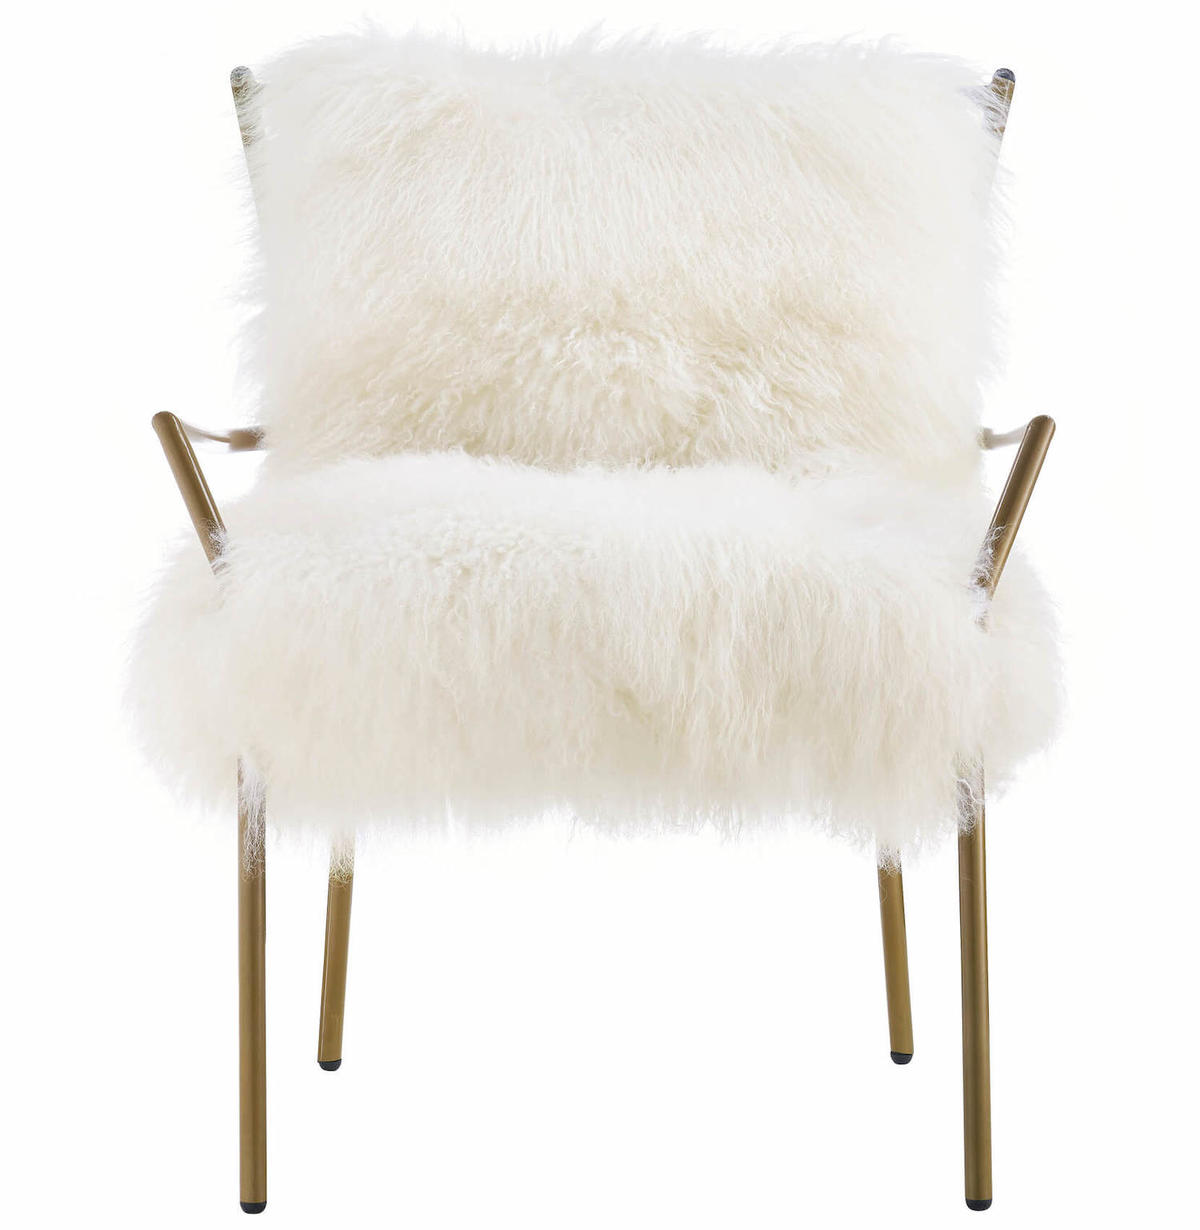 Wild and wooly: 9 ways to decorate with fuzzy fur